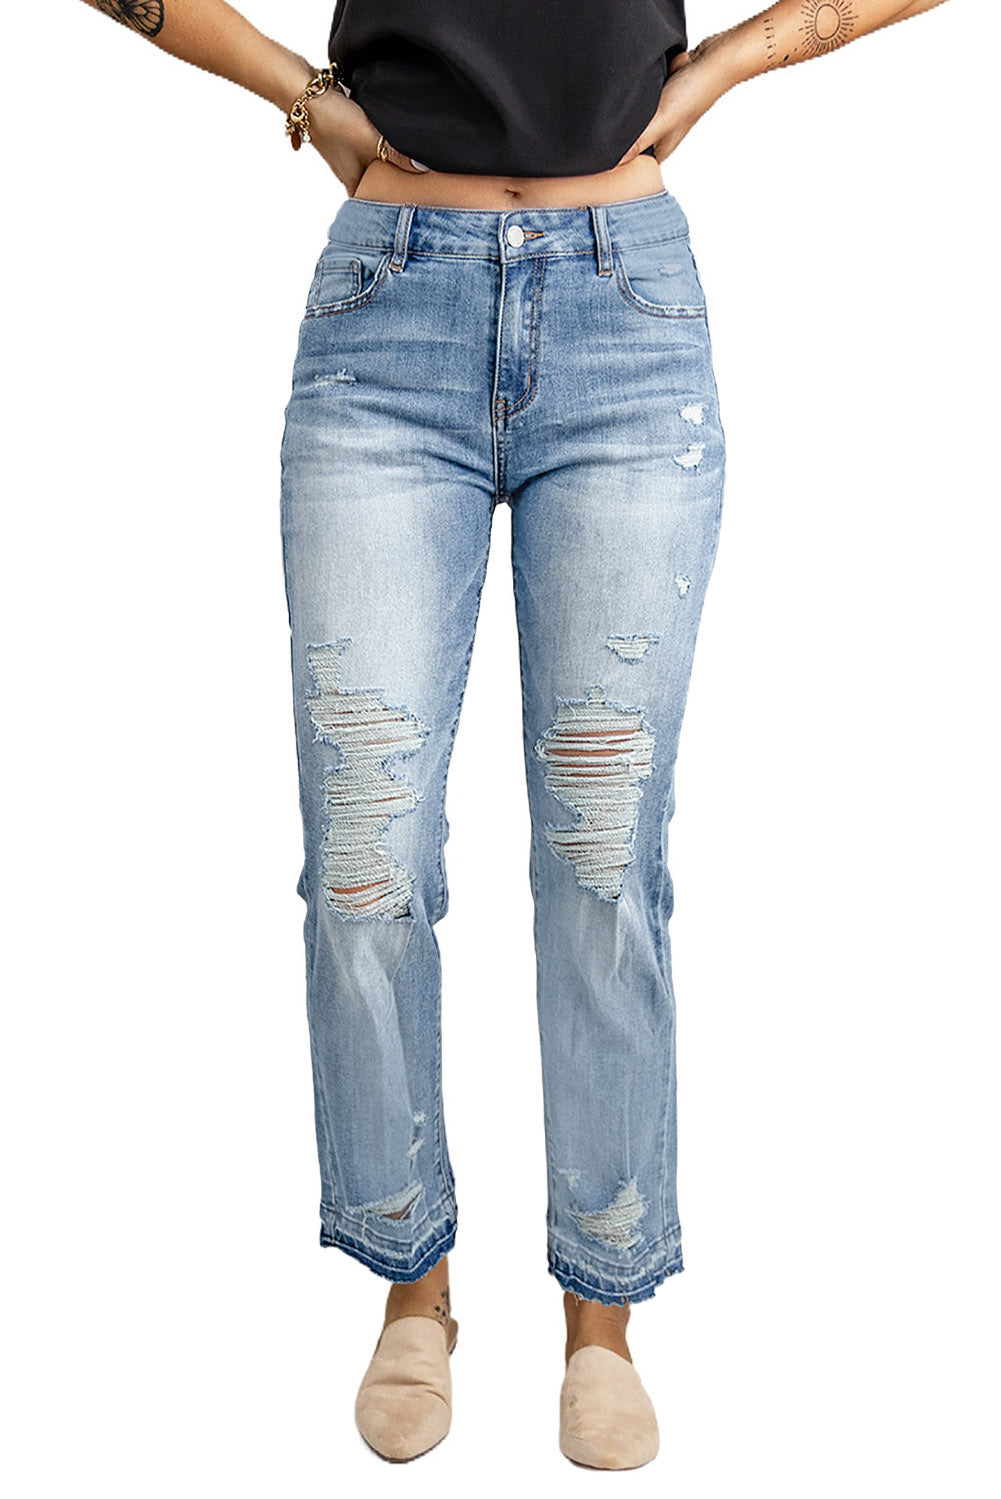 Sky Blue Washed Straight Leg Distressed High Waist Jeans Jeans JT's Designer Fashion